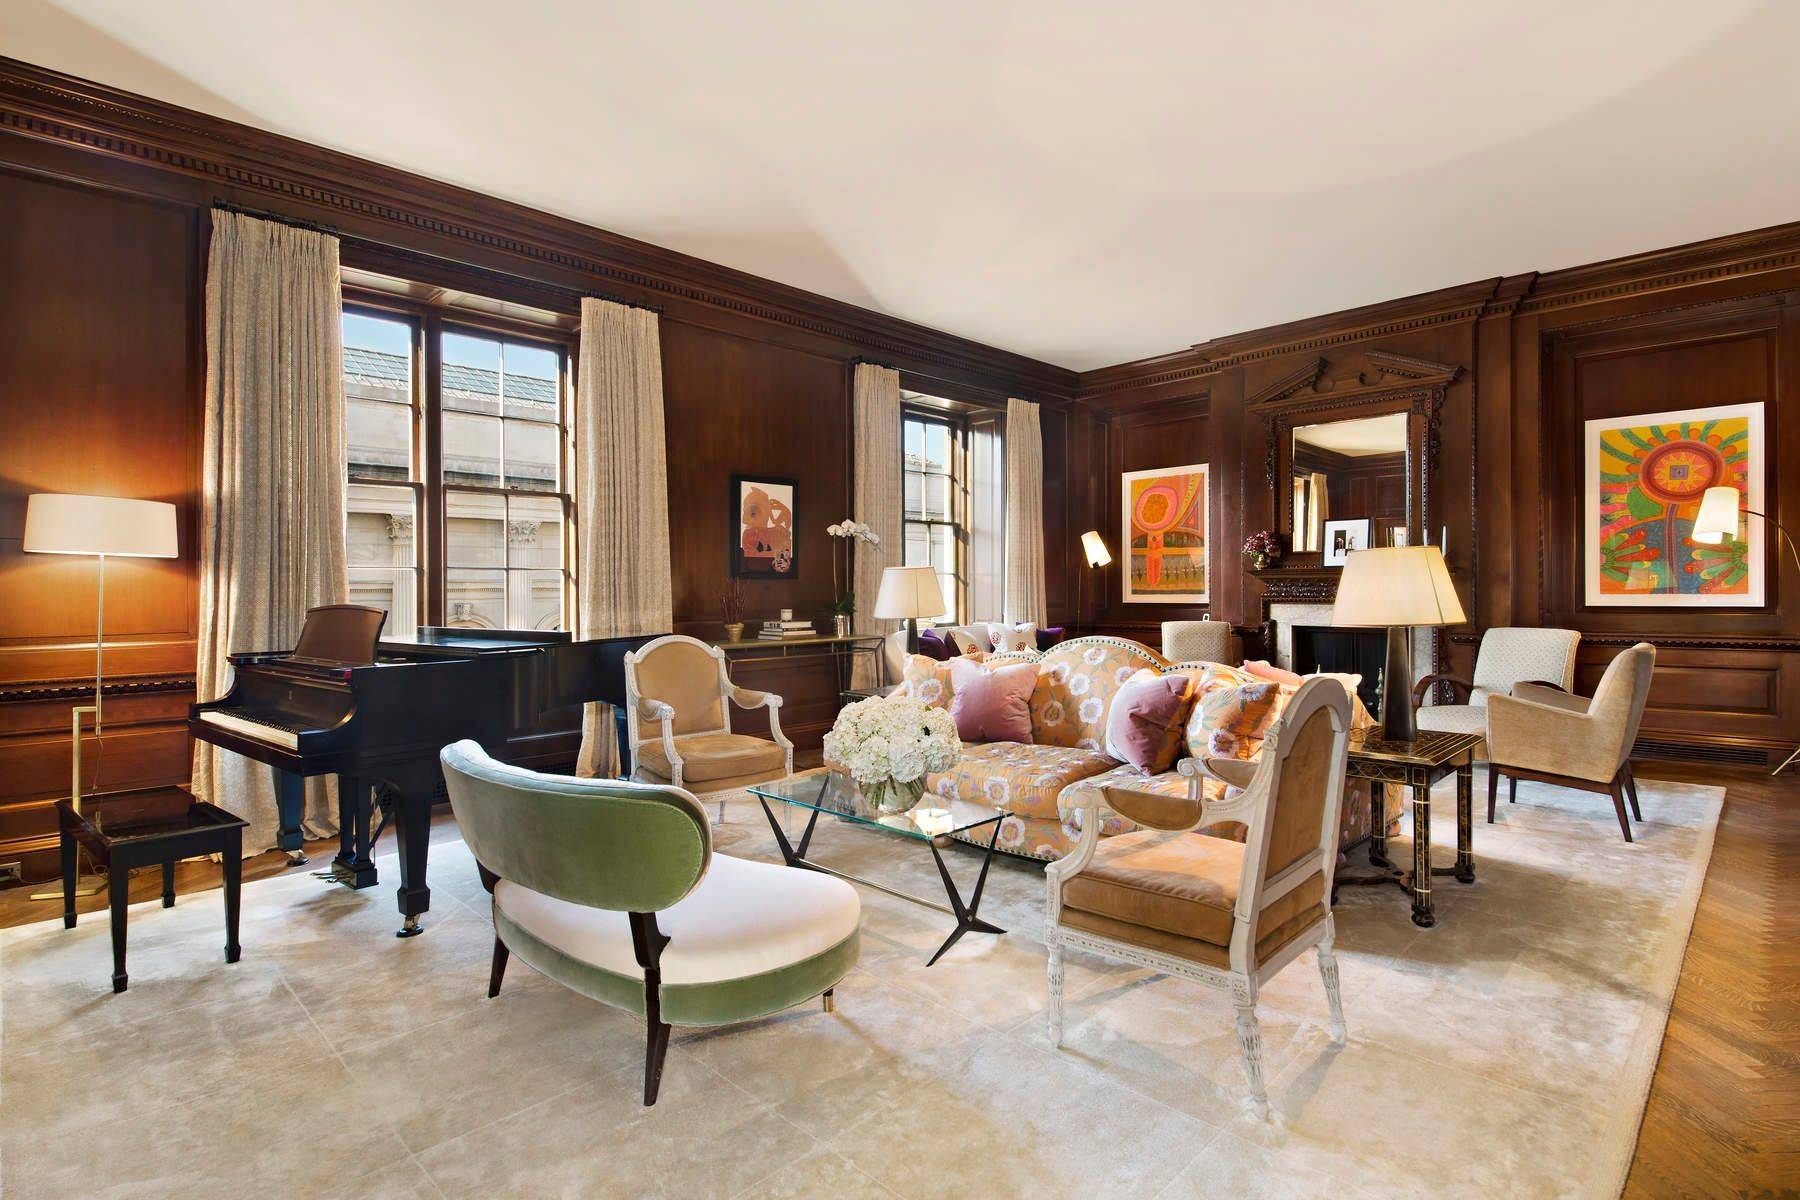 This marvelous and grand simplex, is superbly located in the heart of the Upper East Side, in one of New York's most prestigious white glove cooperatives.